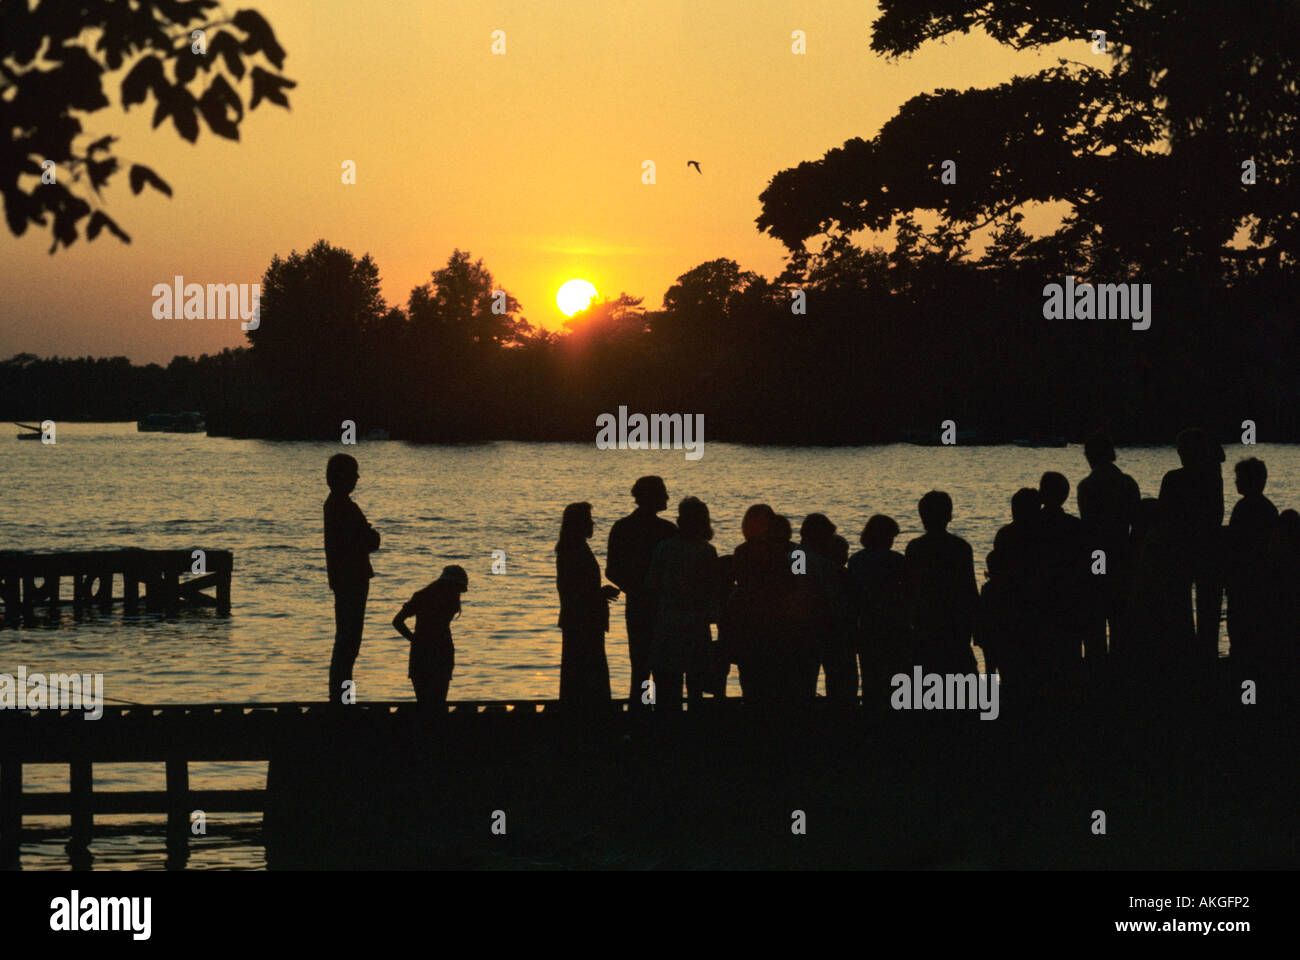 People standing on jetty watching the sunset, Oulton Broad, Suffolk, England Stock Photo